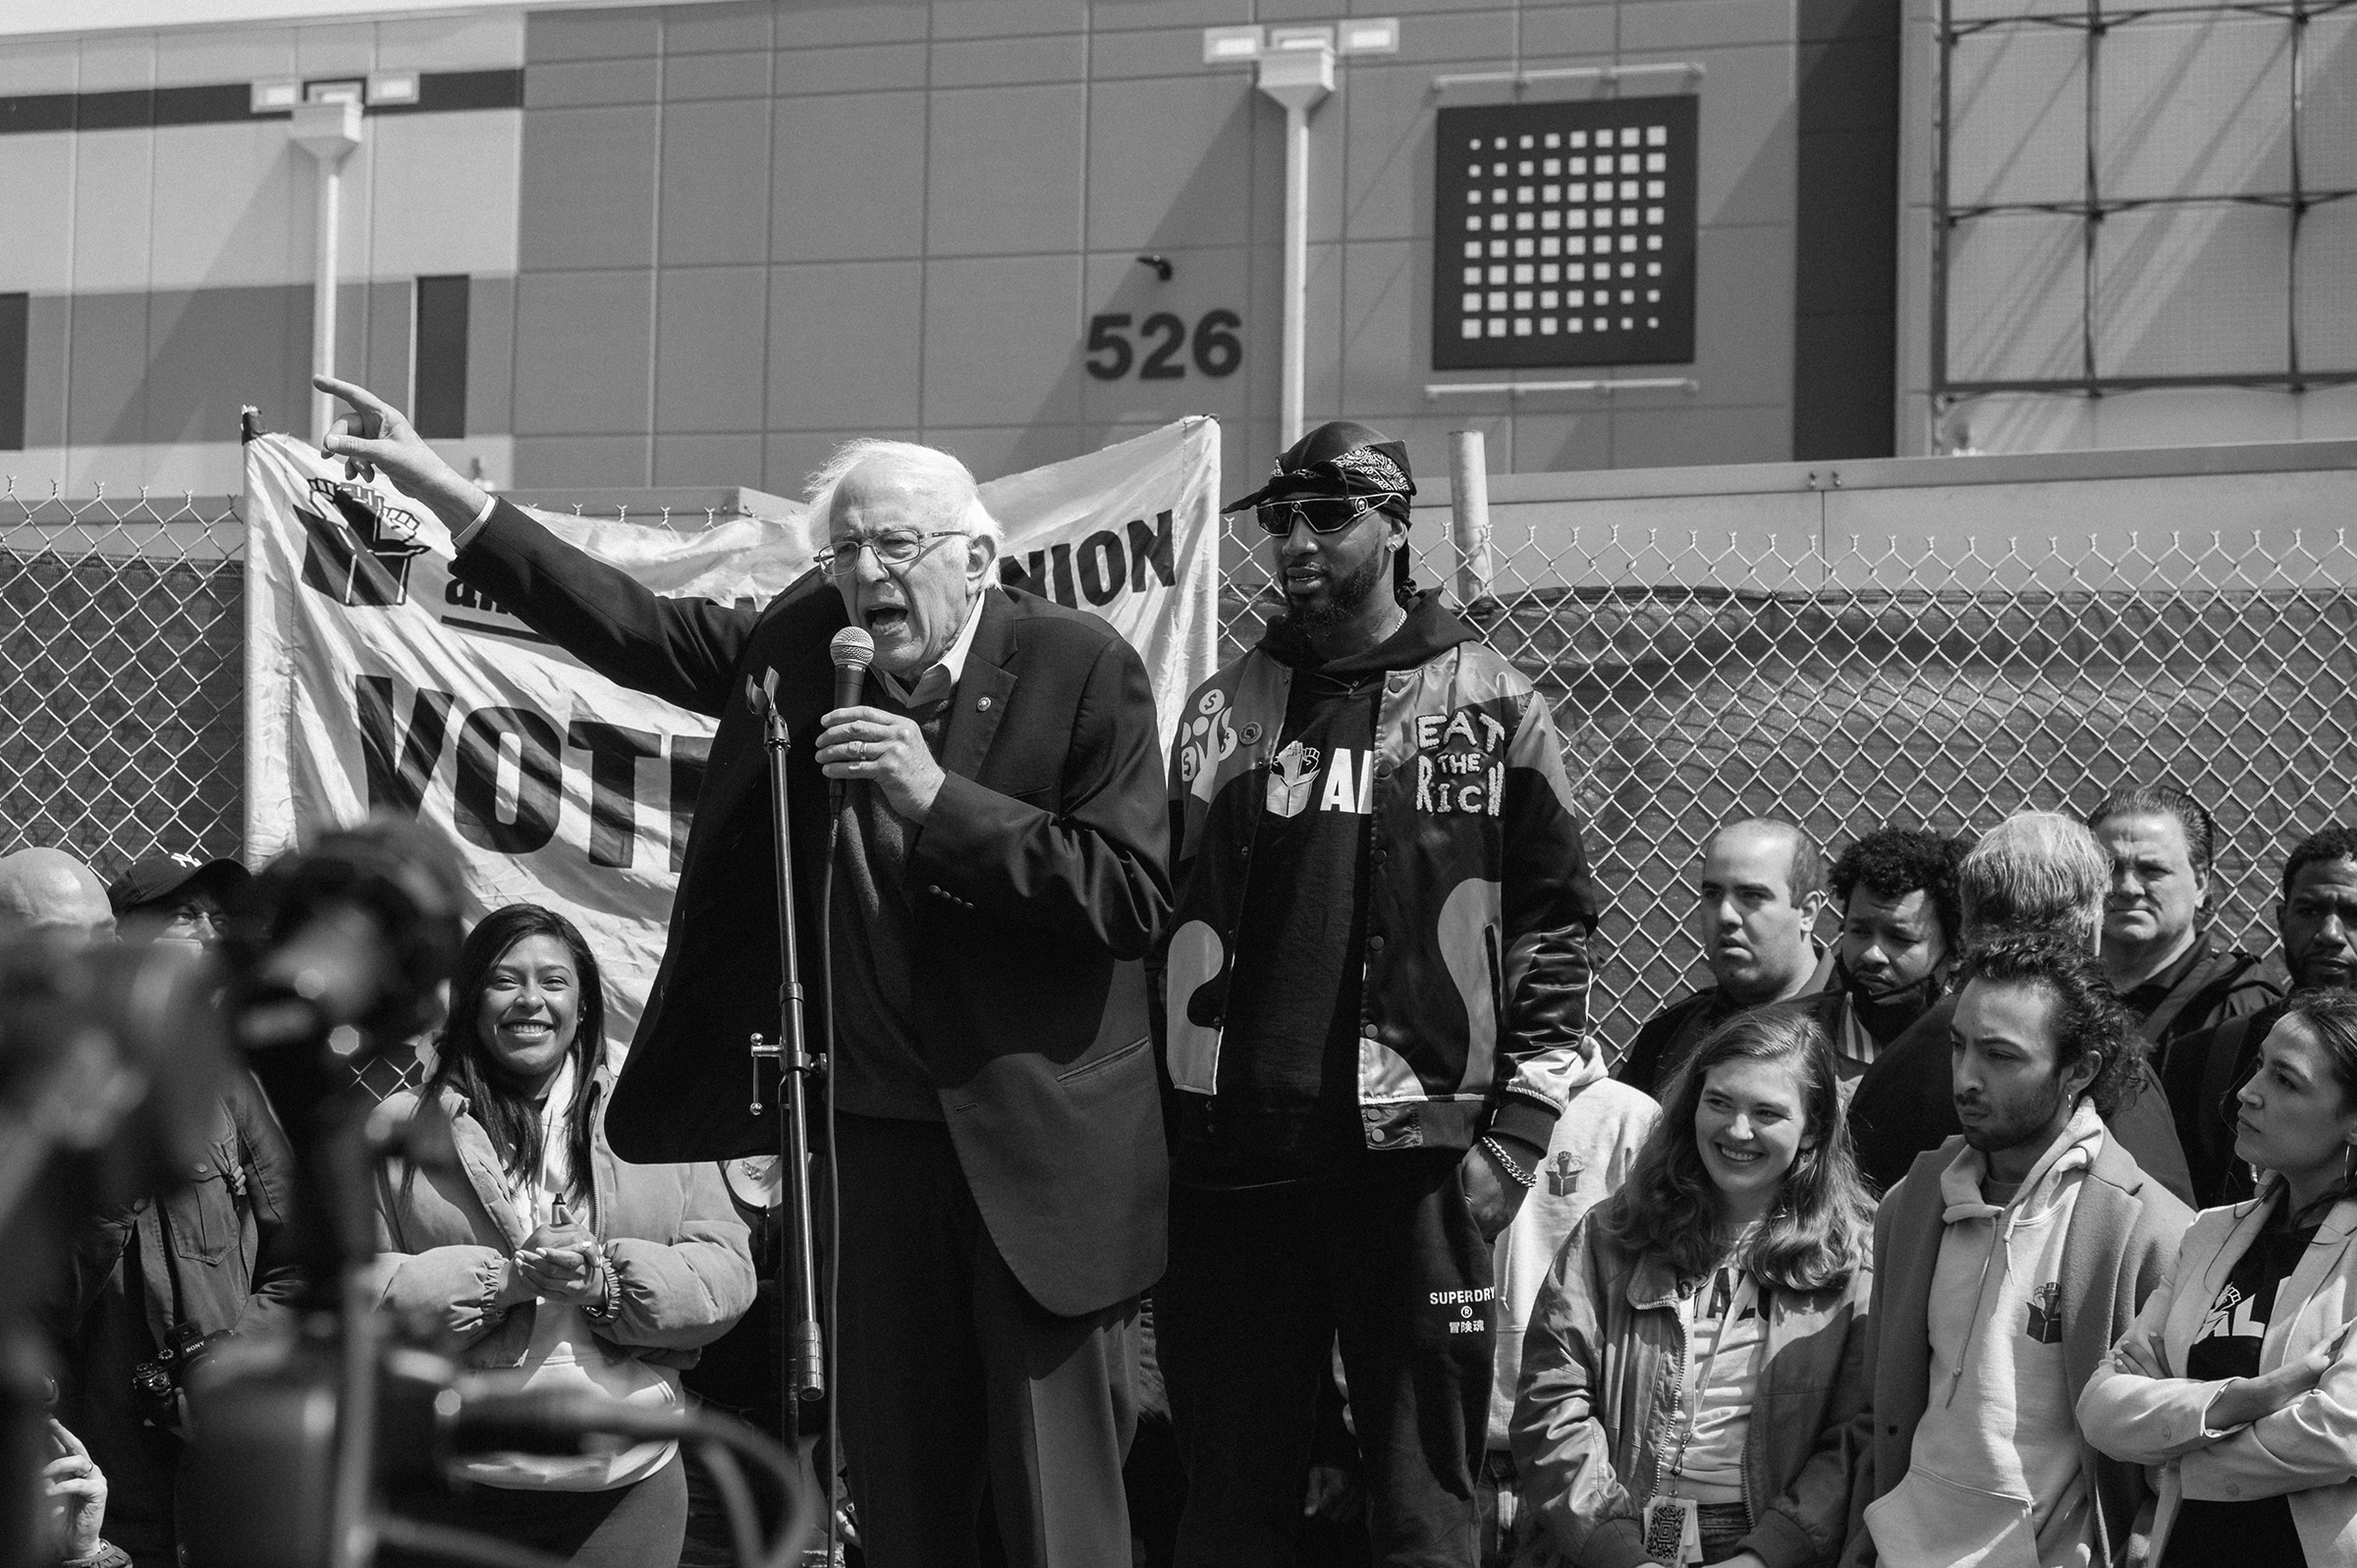 Senator Bernie Sanders, speaks next to Christian Smalls, founder of the Amazon Labor Union (ALU), during rally in the Staten Island,New York on April 24, 2022. (Stephen Obisanya for TIME)